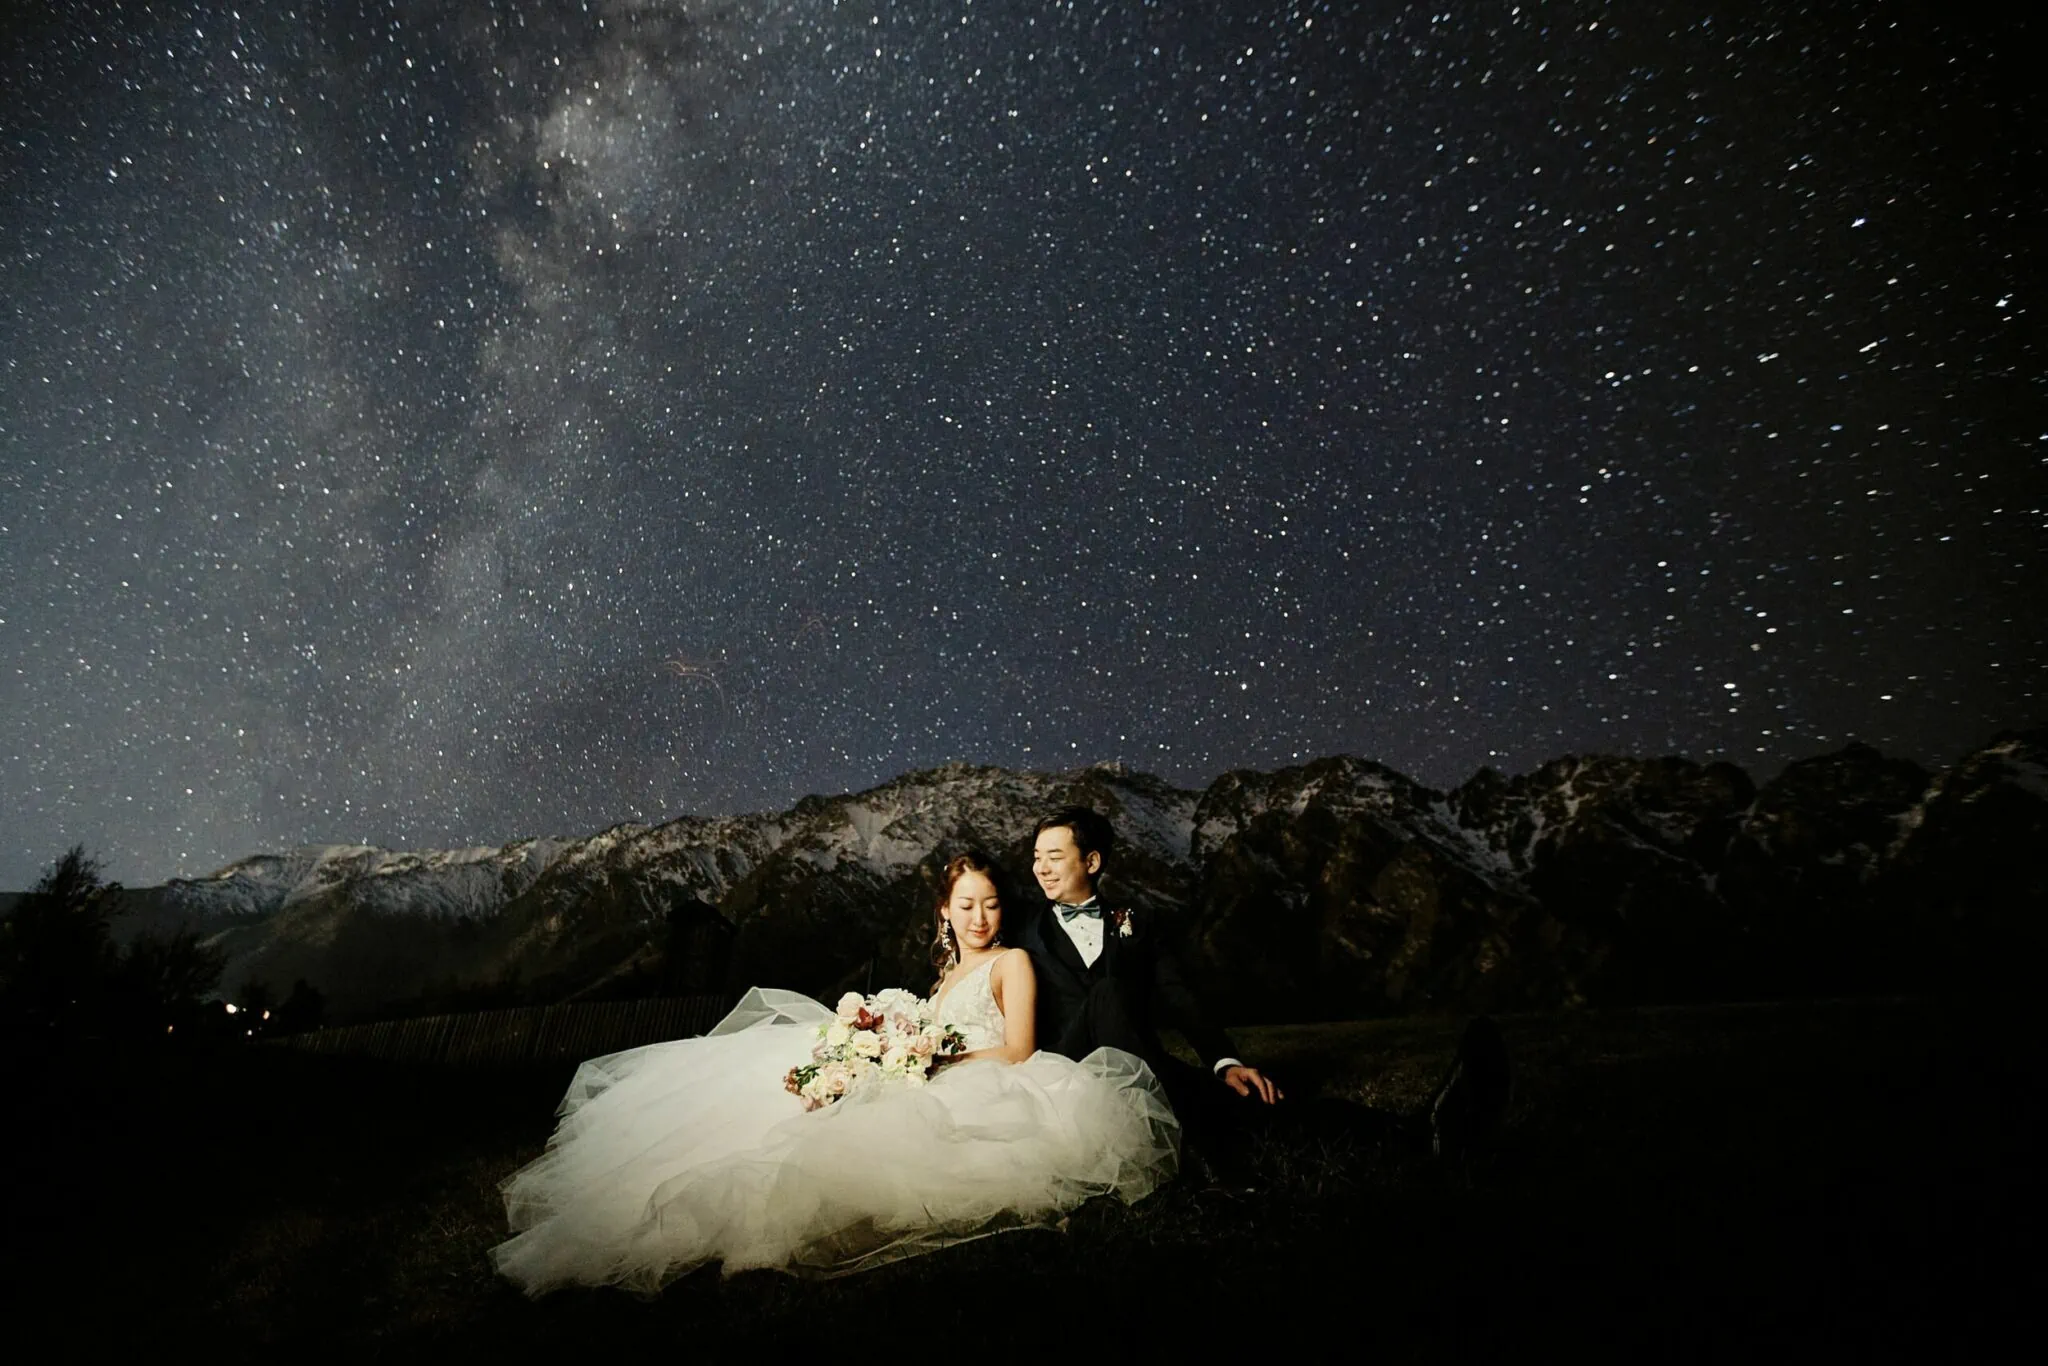 Queenstown New Zealand Elopement Wedding Photographer - A couple sitting under a starry sky, captured in our Starry Night Shoot portfolio.